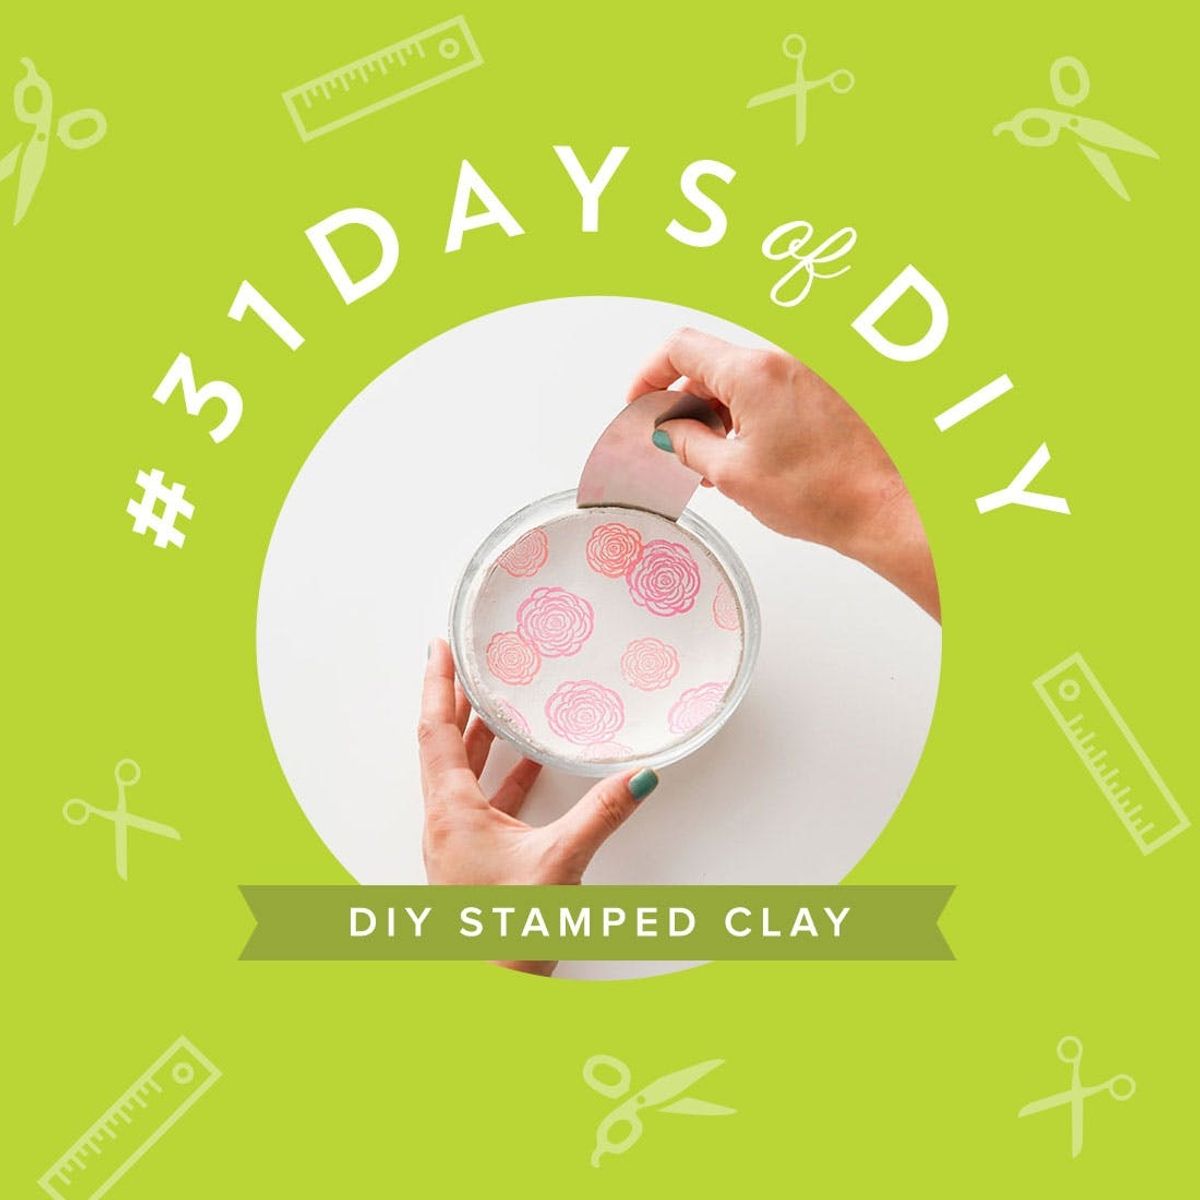 Make Your Own Clay Desk Accessories With Rubber Stamps